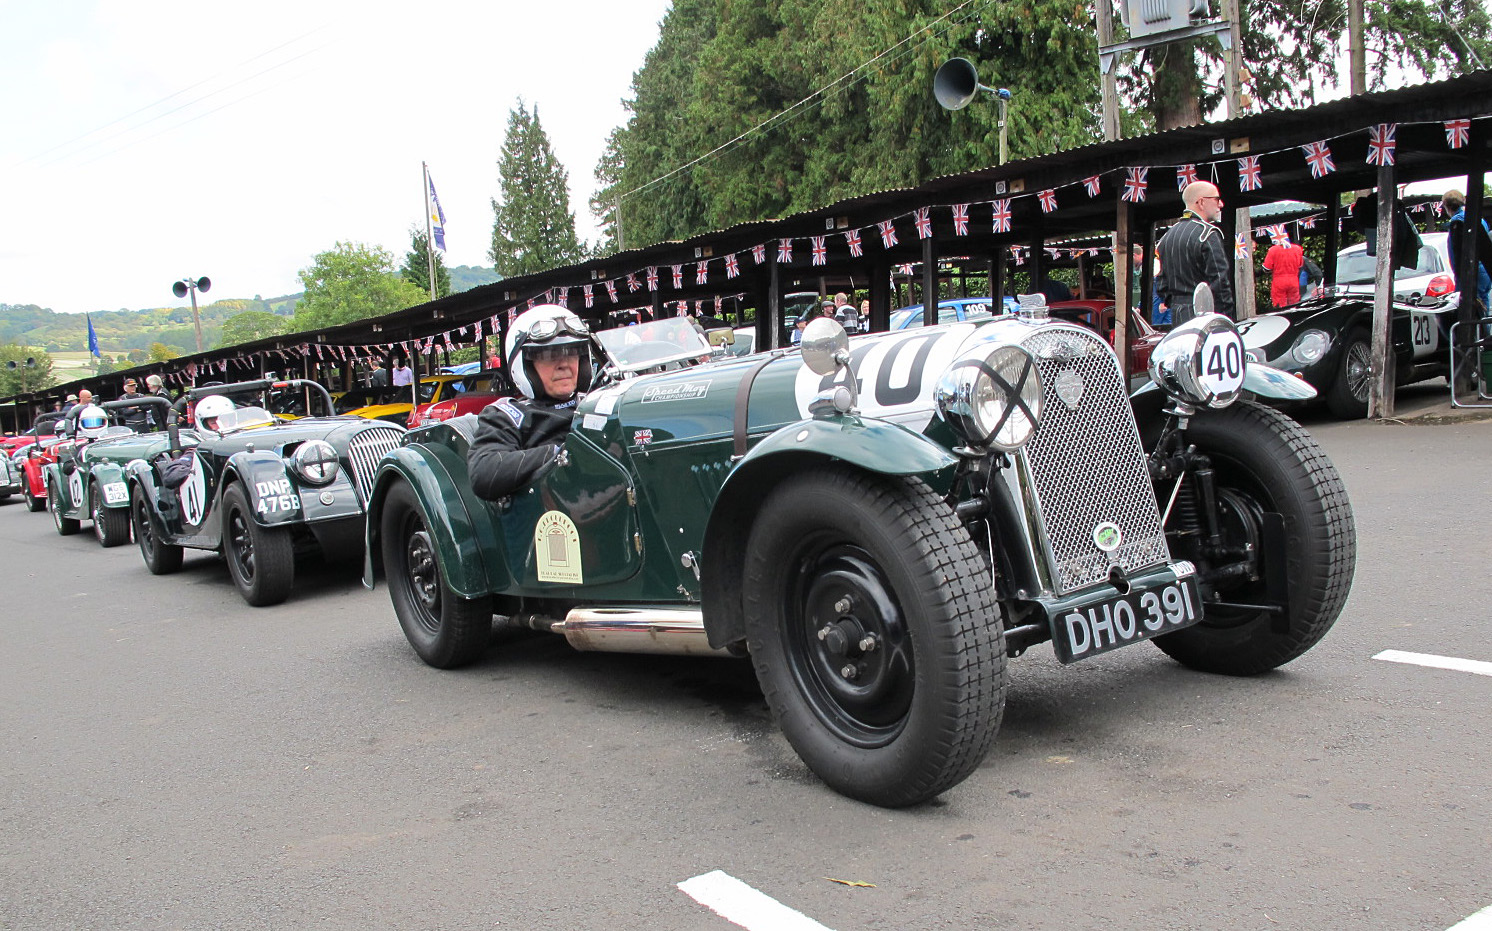 , Movie star car and Edd China’s couch highlight Kop Hill Climb, ClassicCars.com Journal